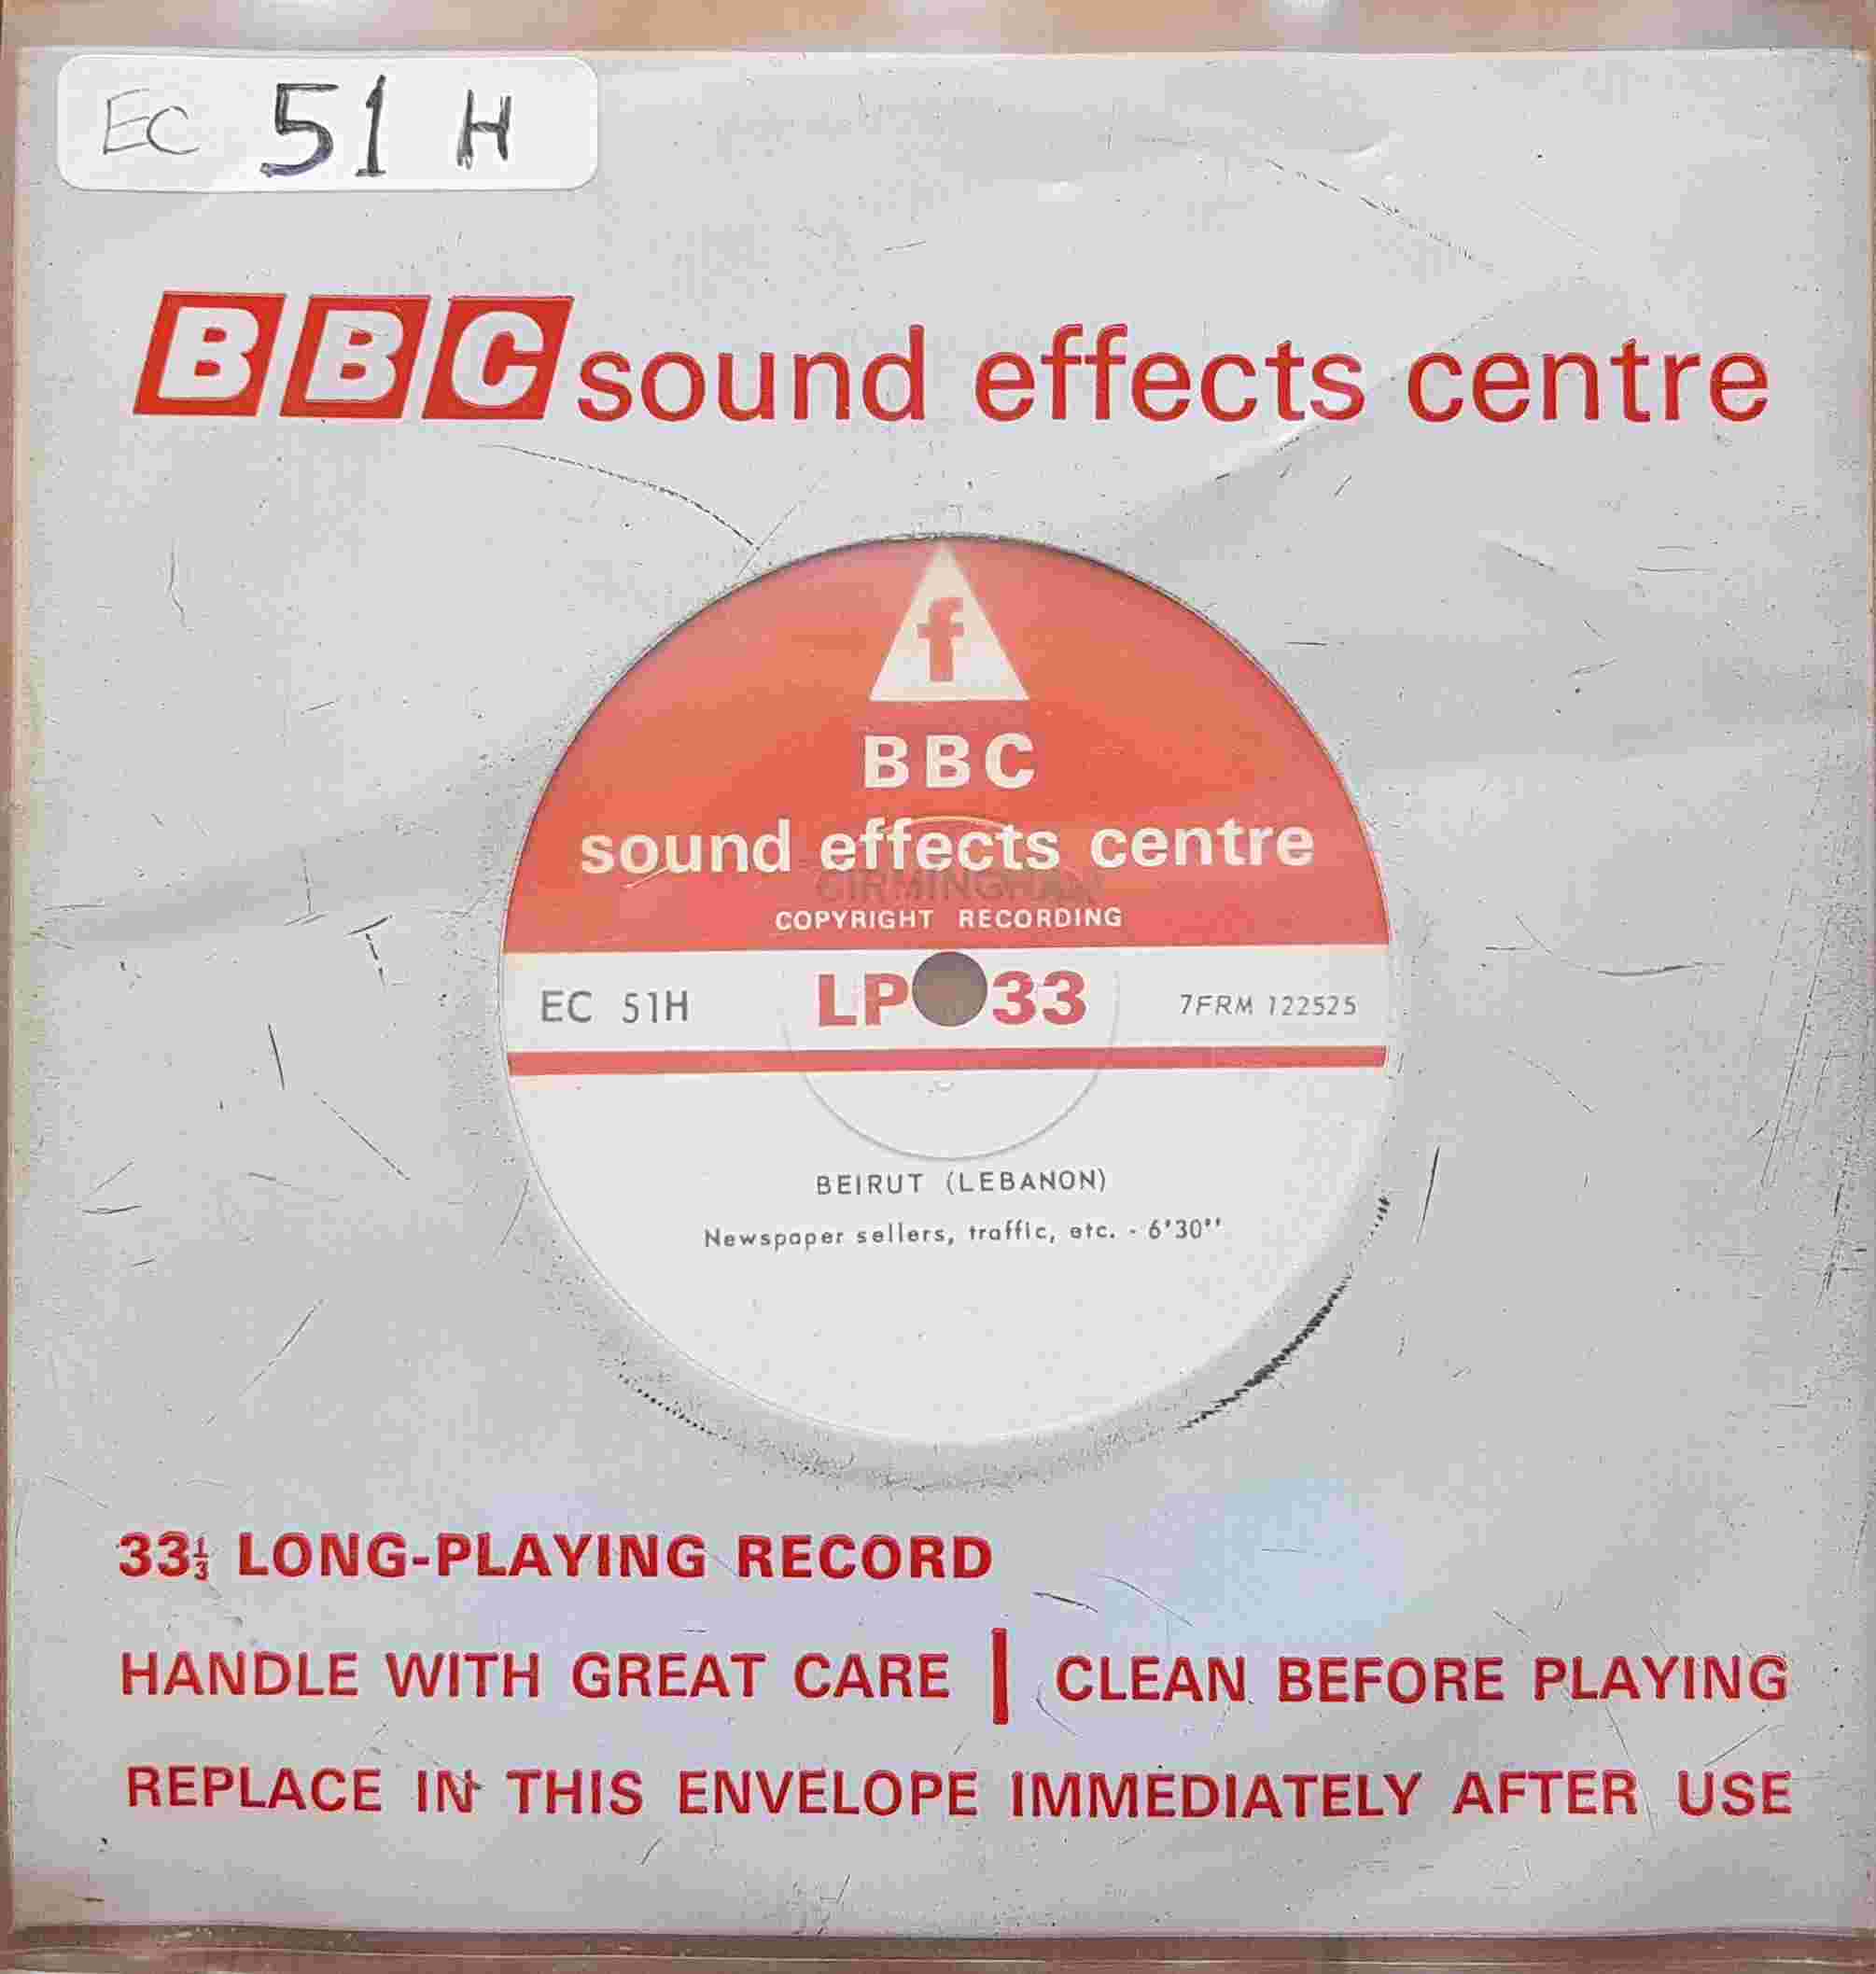 Picture of EC 51H Beirut (Lebanon) by artist Not registered from the BBC singles - Records and Tapes library